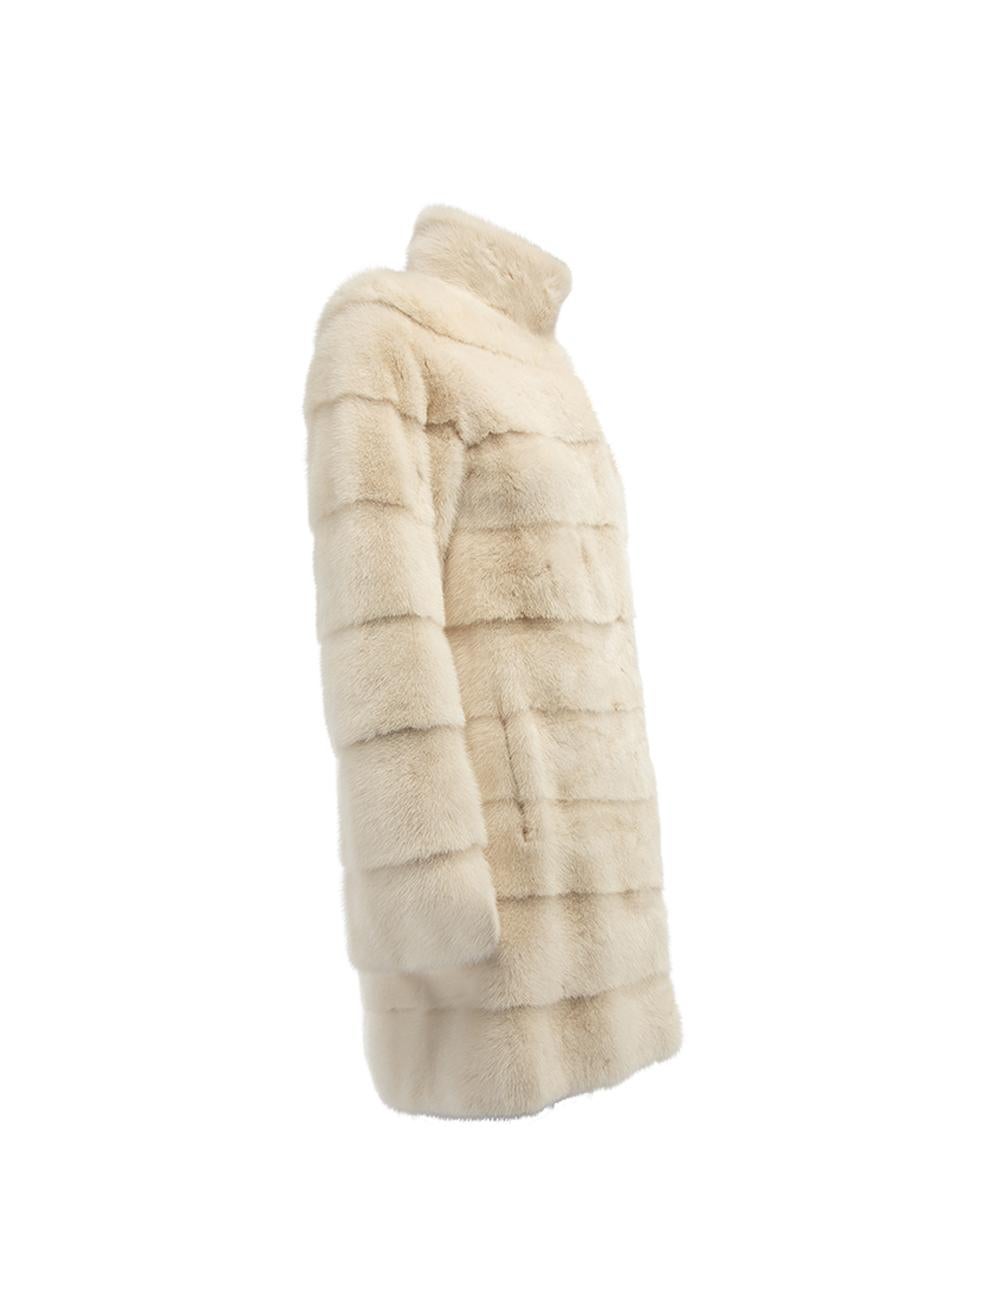 CONDITION is Very good. Hardly any visible wear to coat is evident on this used Yves Salomon designer resale item. Details Cream Mink fur Single breasted coat Mid length Turn clasp and eye front closure Front side pockets Fully lined Composition